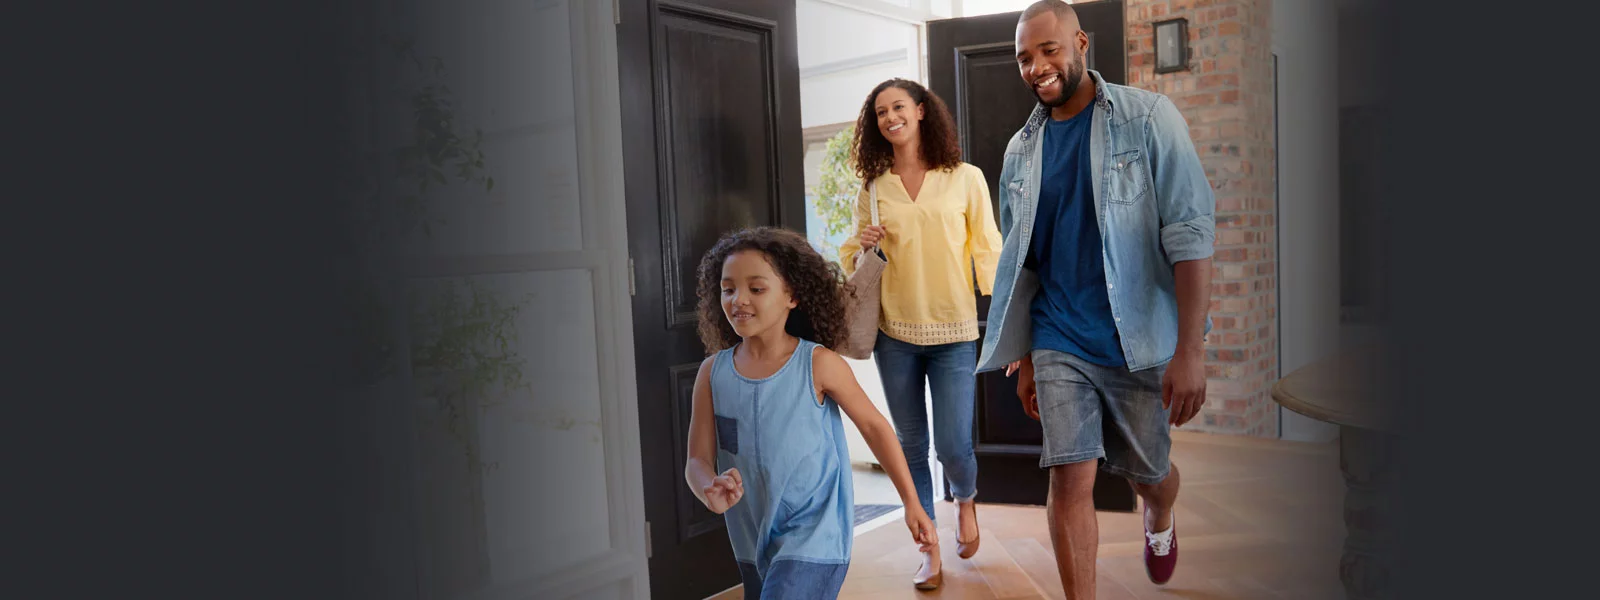 Family walking into pest free home